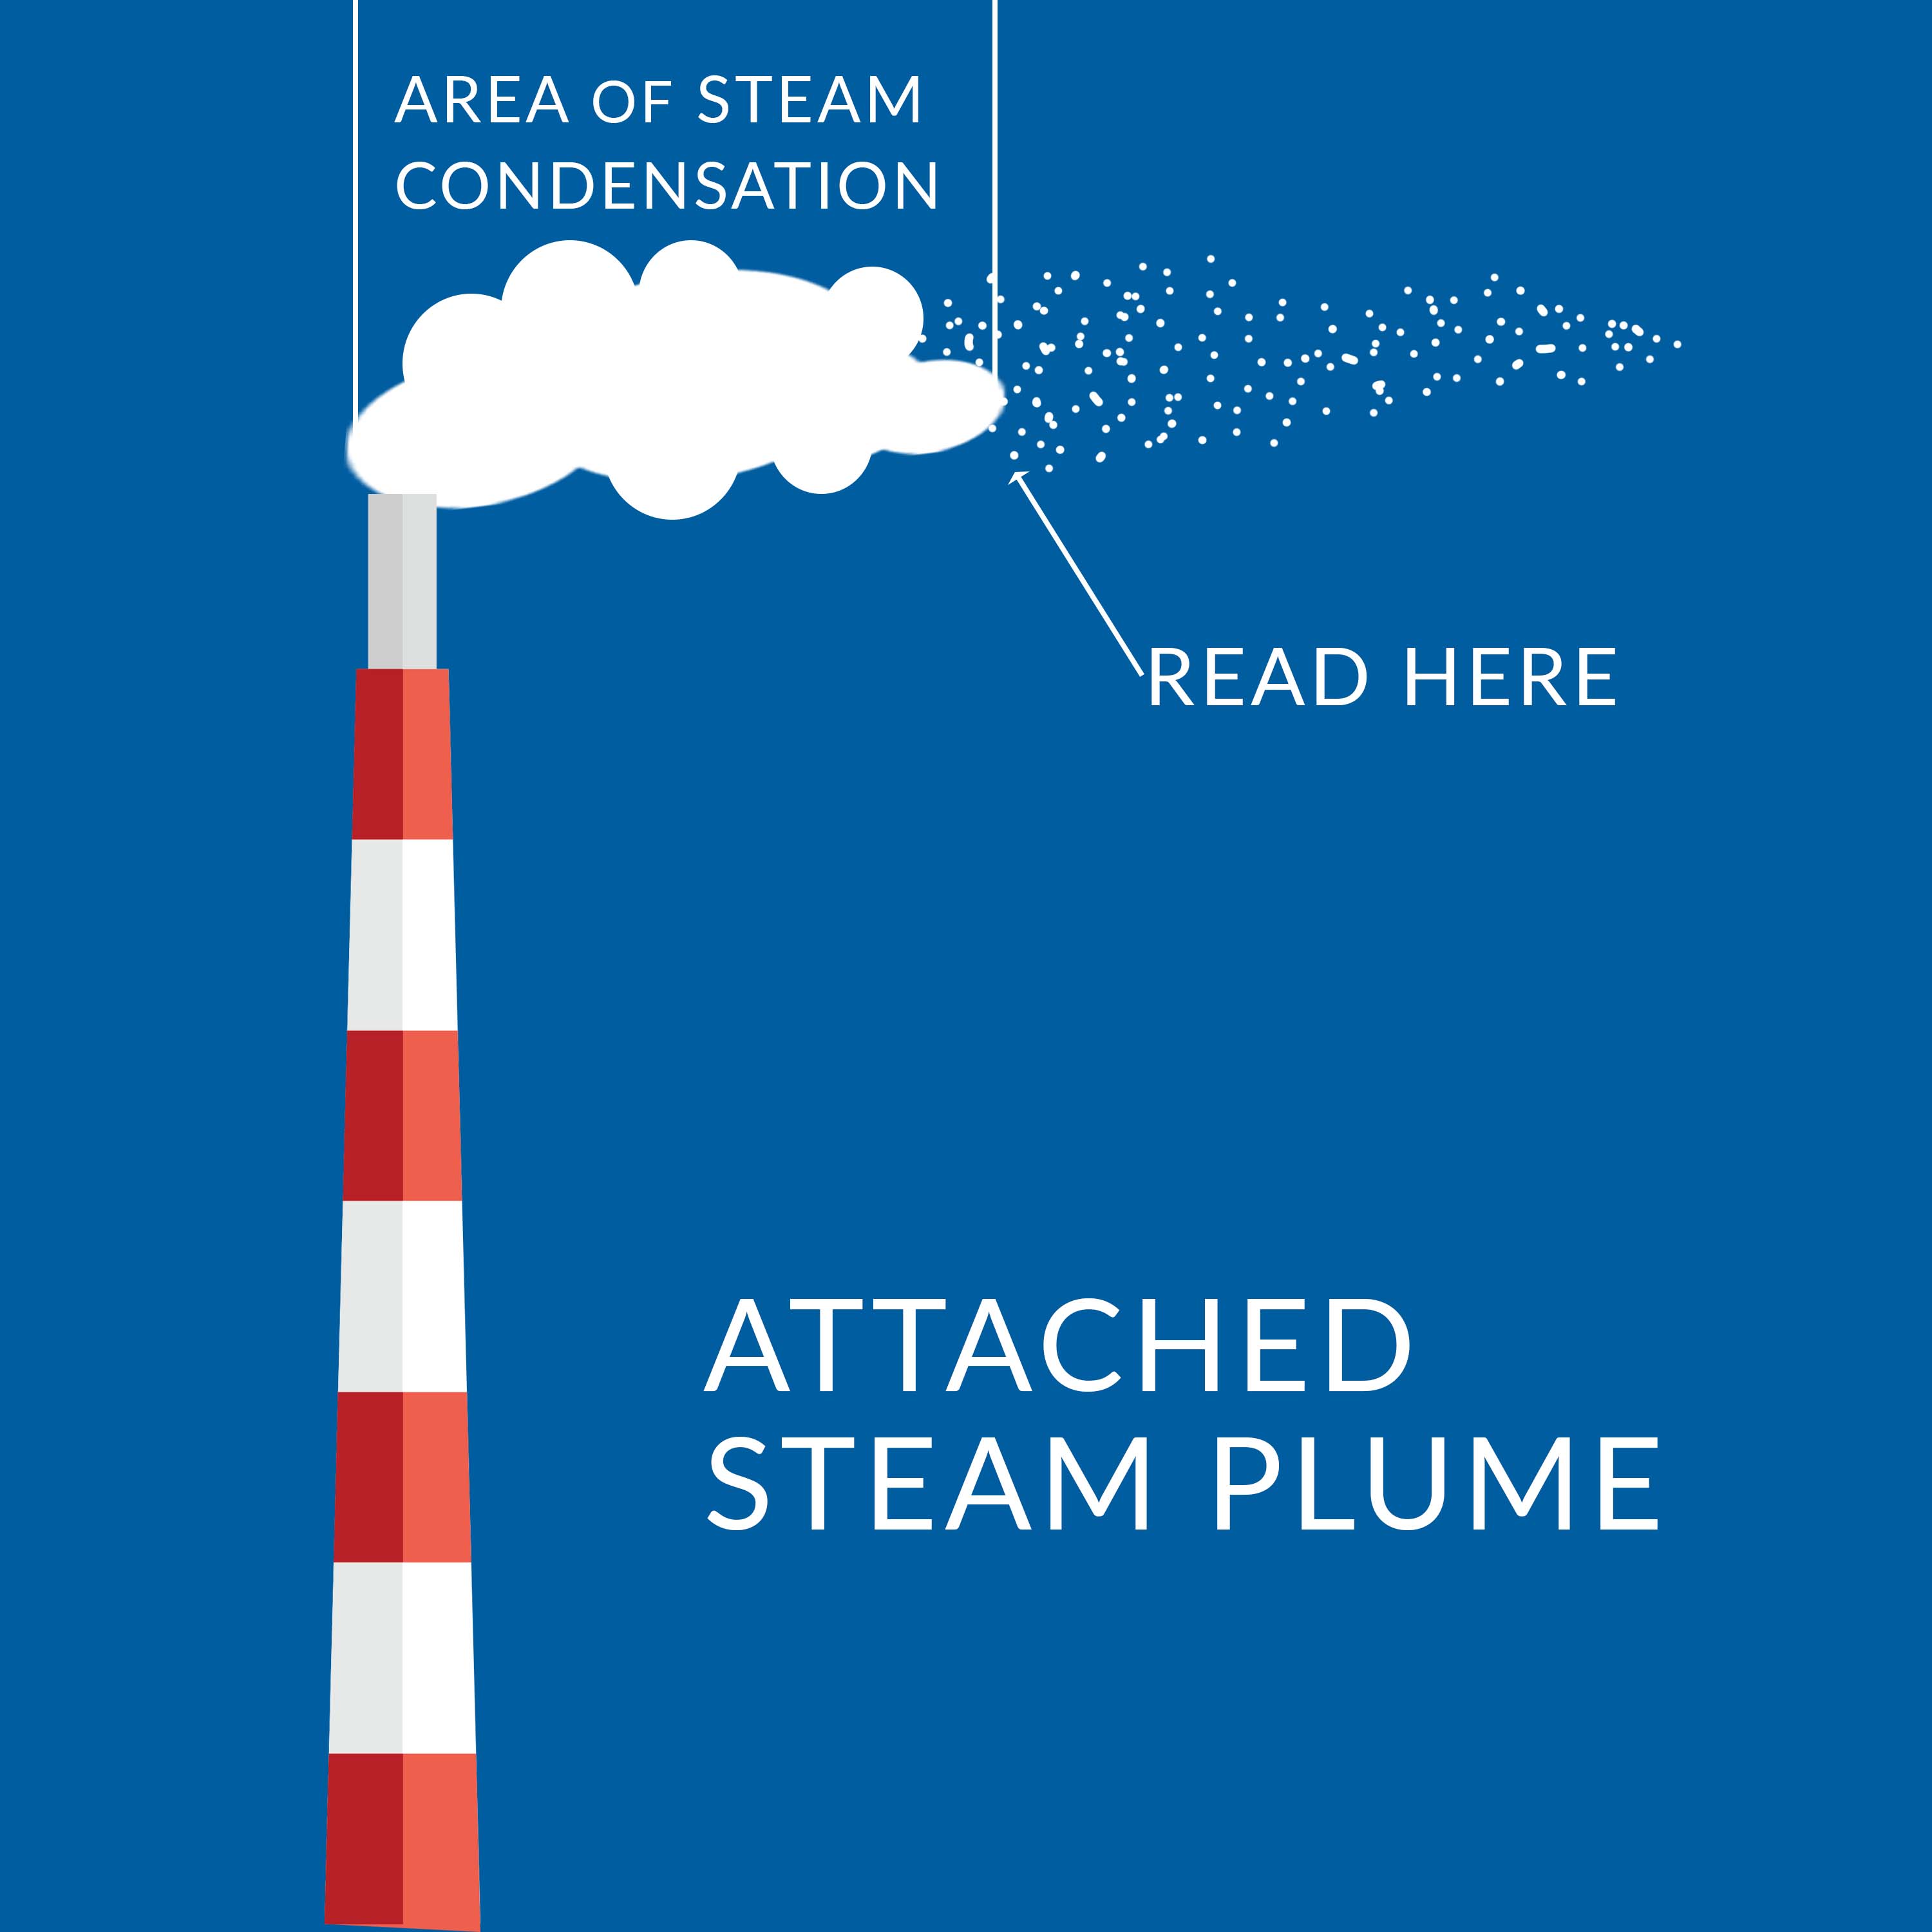 Attached steam plume